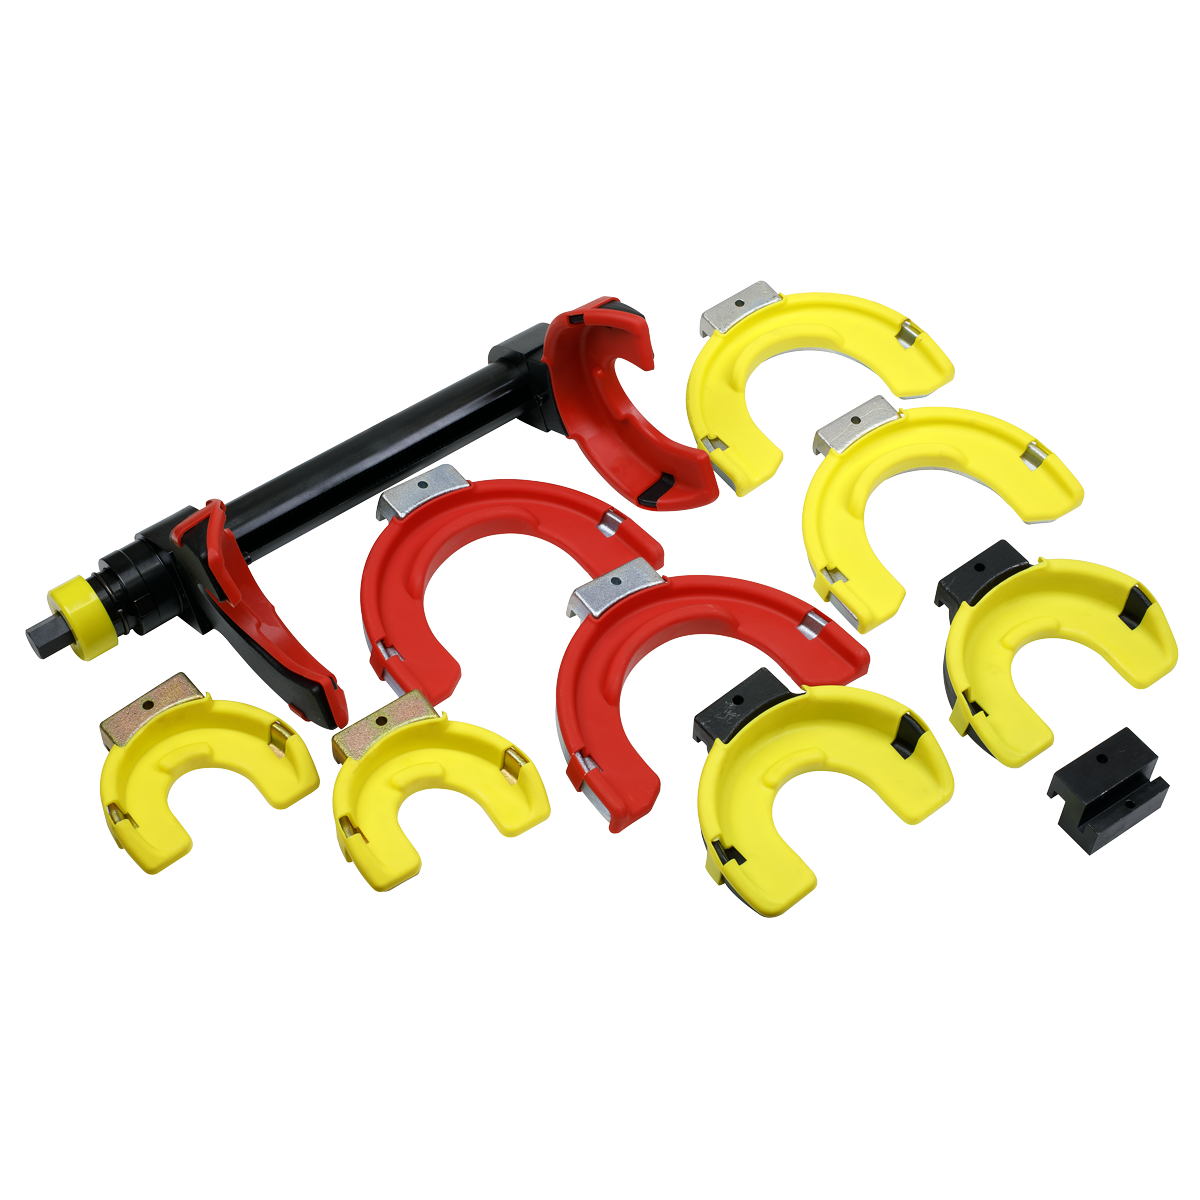 Professional Coil Spring Compressor Set - Right-Hand/Left-Hand - RE249 - Farming Parts